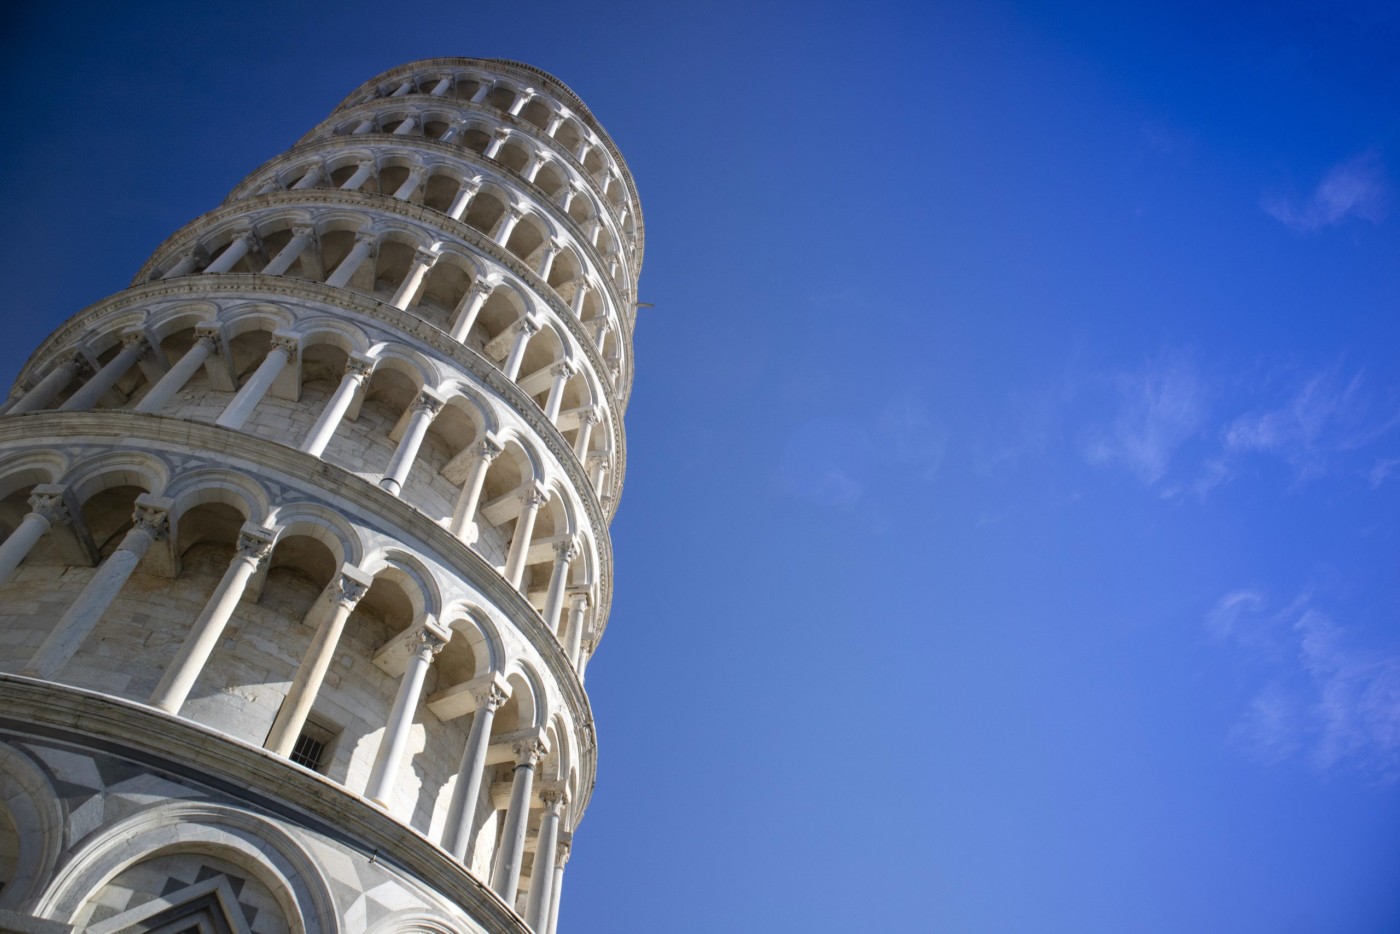 Perspective view of the architecture of the Leaning Tower of Pisa Tuscany Italy